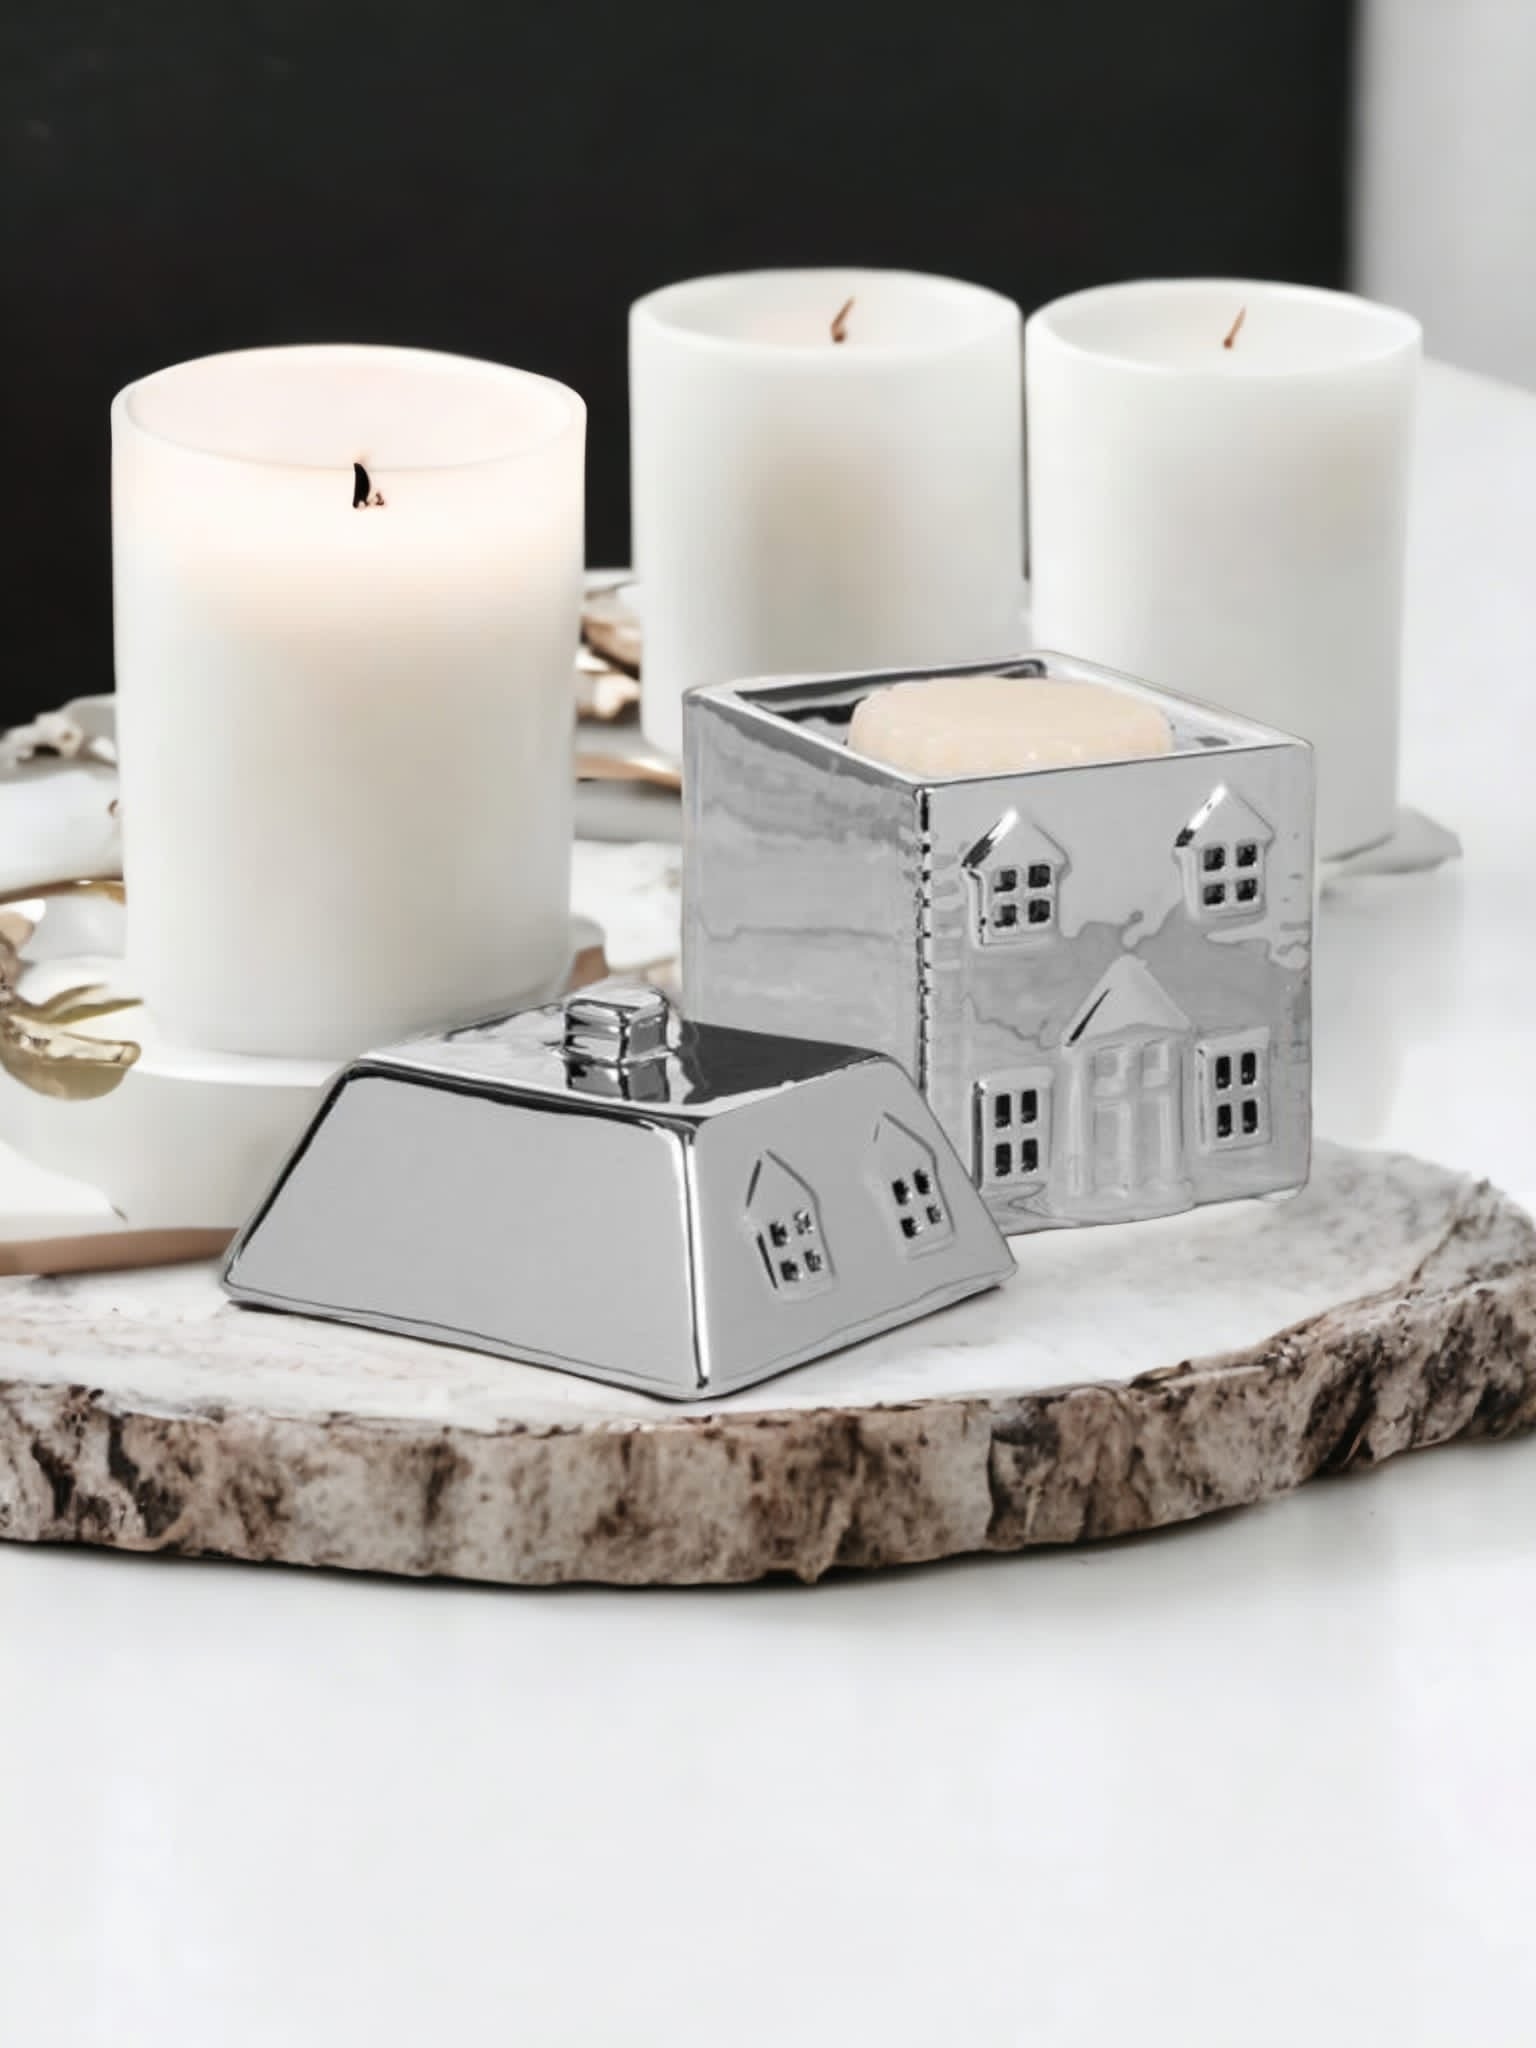 Candles and a Silver Cosy Home Wax Melt Burner by The Soap Gal x on a wooden slice against a white background.